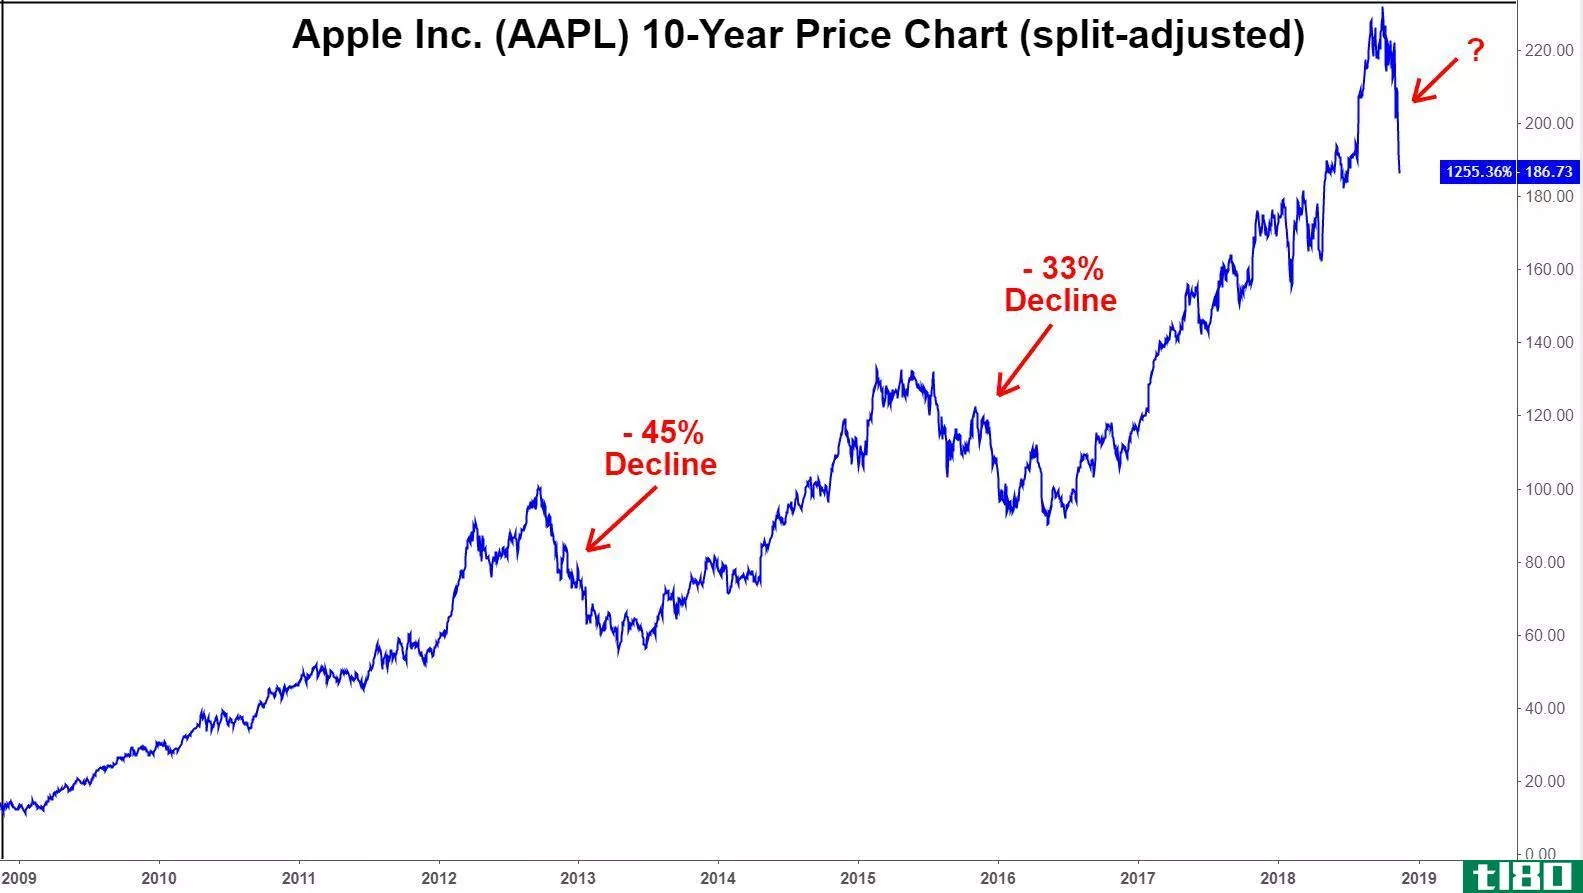 Chart showing the 10-year performance of Apple Inc. (AAPL) stock